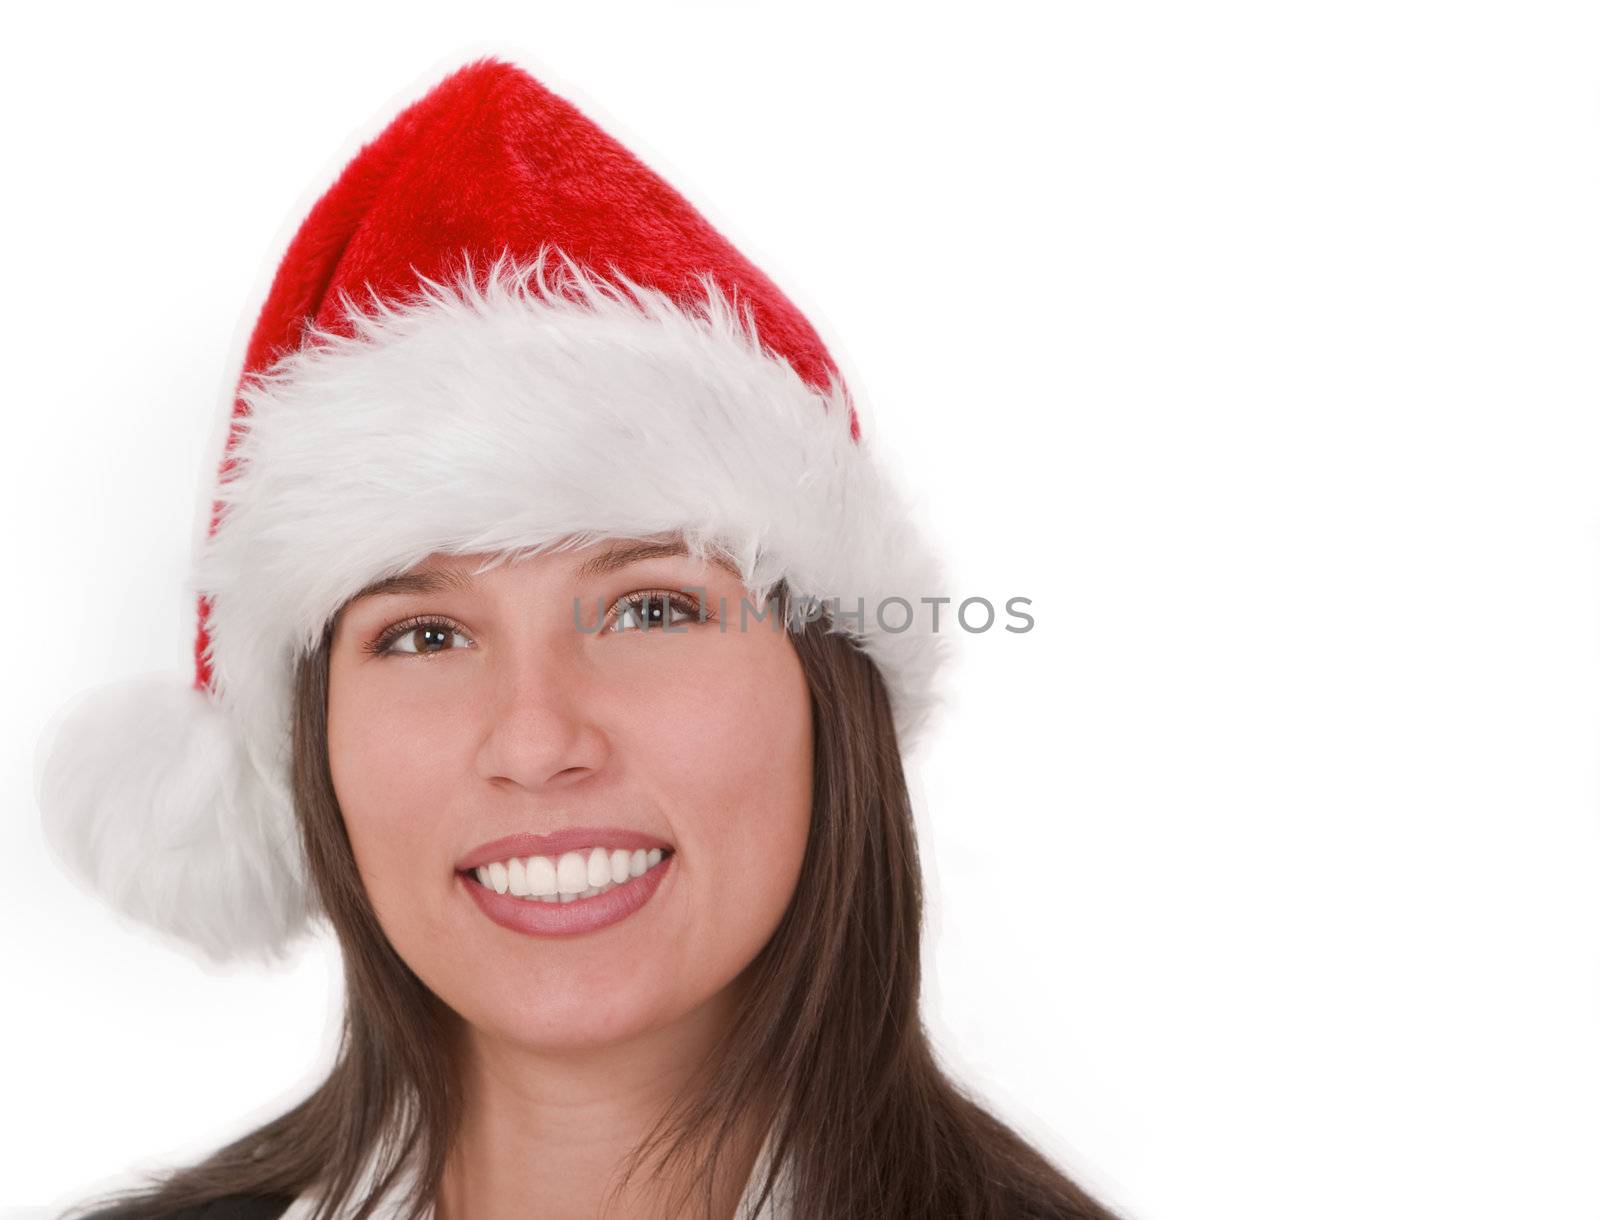 Portrait of a smiling girl wearing a red Santa's hat.